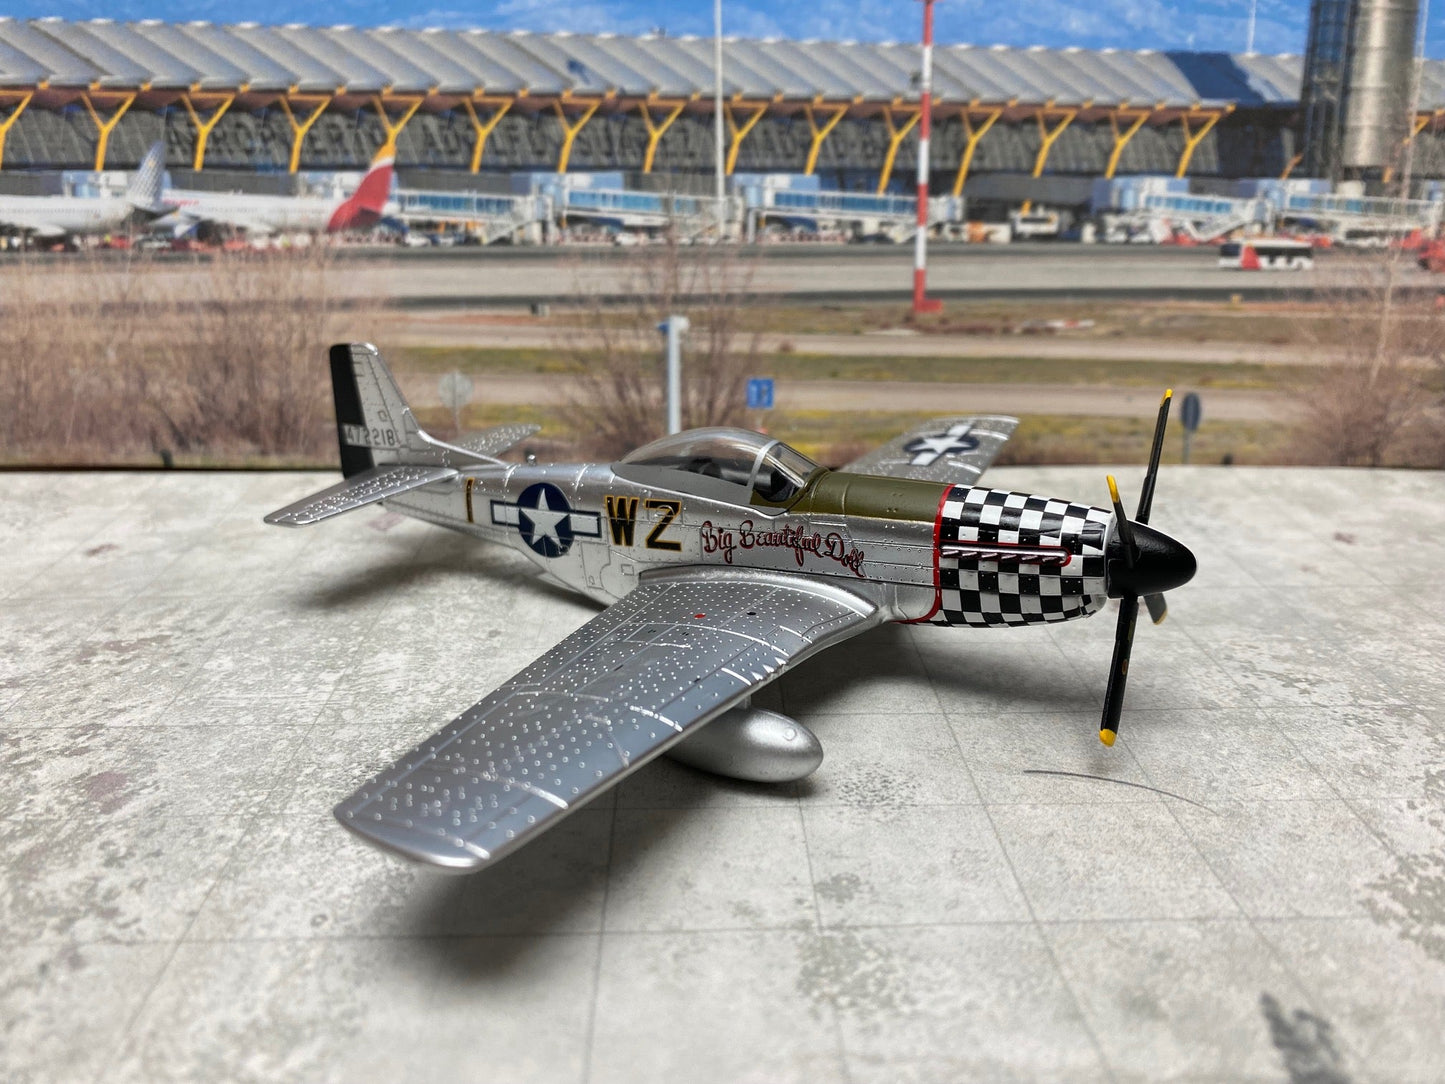 1/72 United States Army Air Forces P-51D Mustang 78th FG, John Landers,"Big Beautiful Doll" Air Force 1 Models AF1-0149A